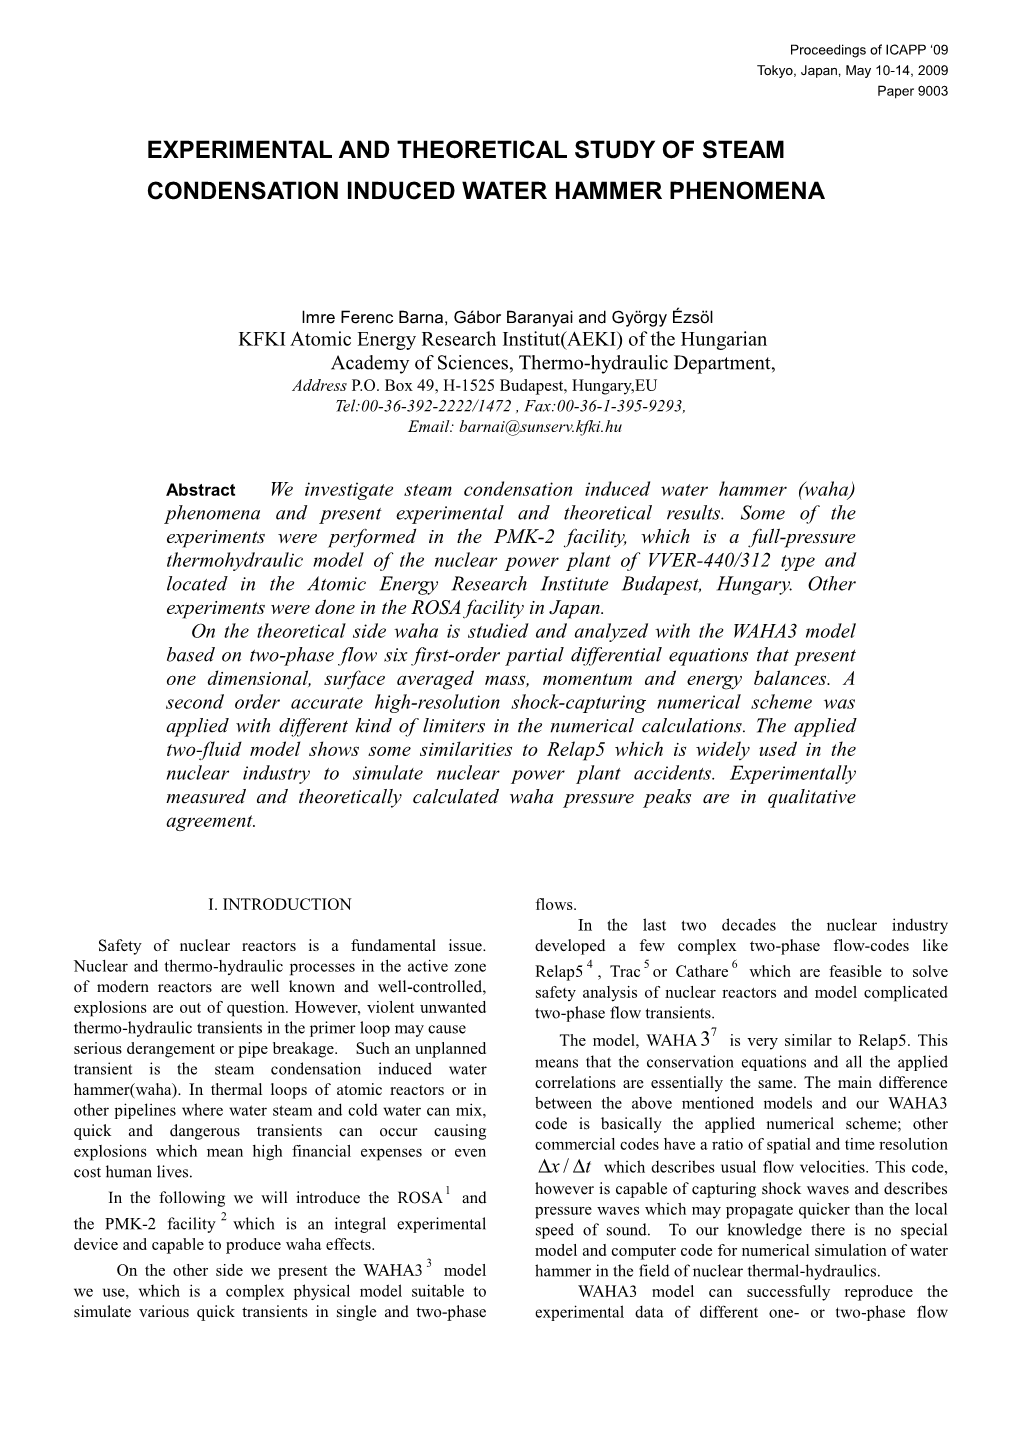 Experimental and Theoretical Study of Steam Condensation Induced Water Hammer Phenomena